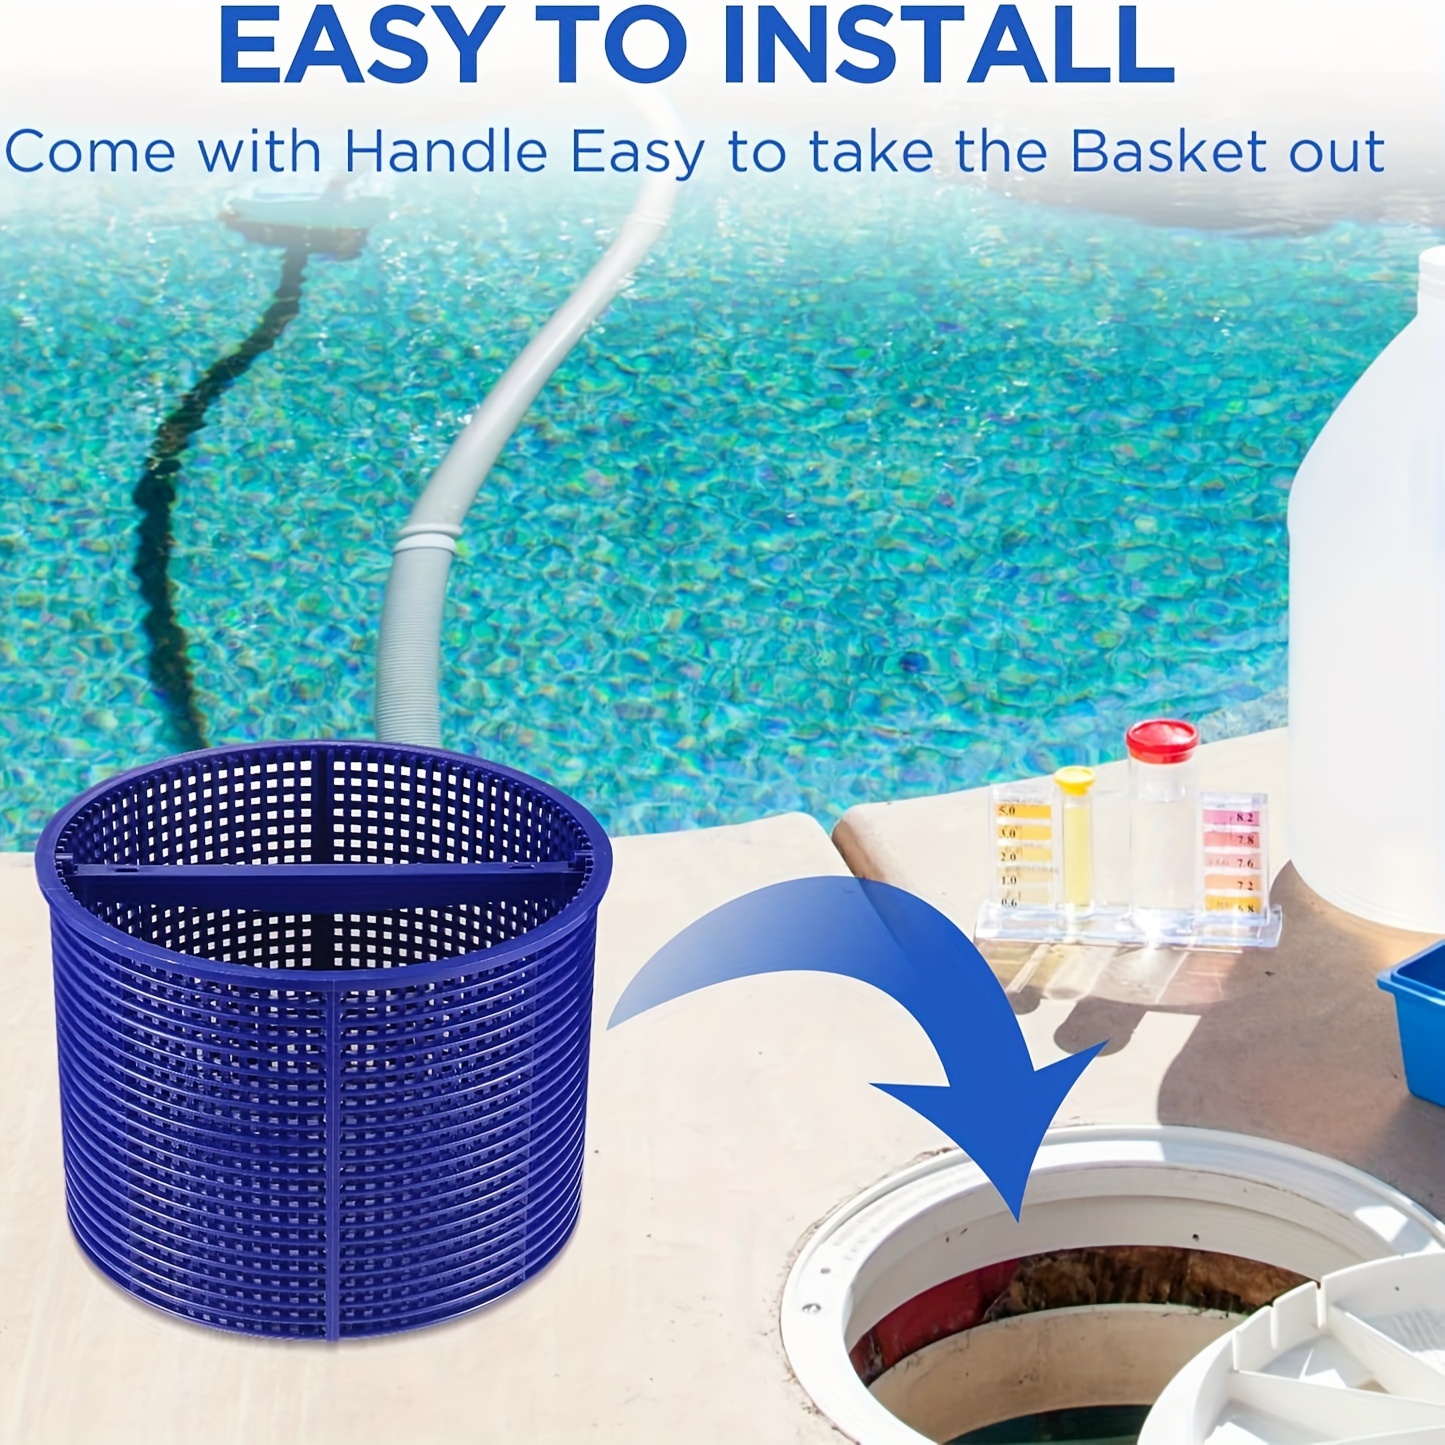 

Hayward Compatible Pool Replacement For Spx1082ca & B-152 - Durable Pe Material, Fits Sp1082, Sp1083, Sp1084, Sp1085, Sp1086, Sp1075 Models - Easy To Install Swimming Pool Filter Accessory